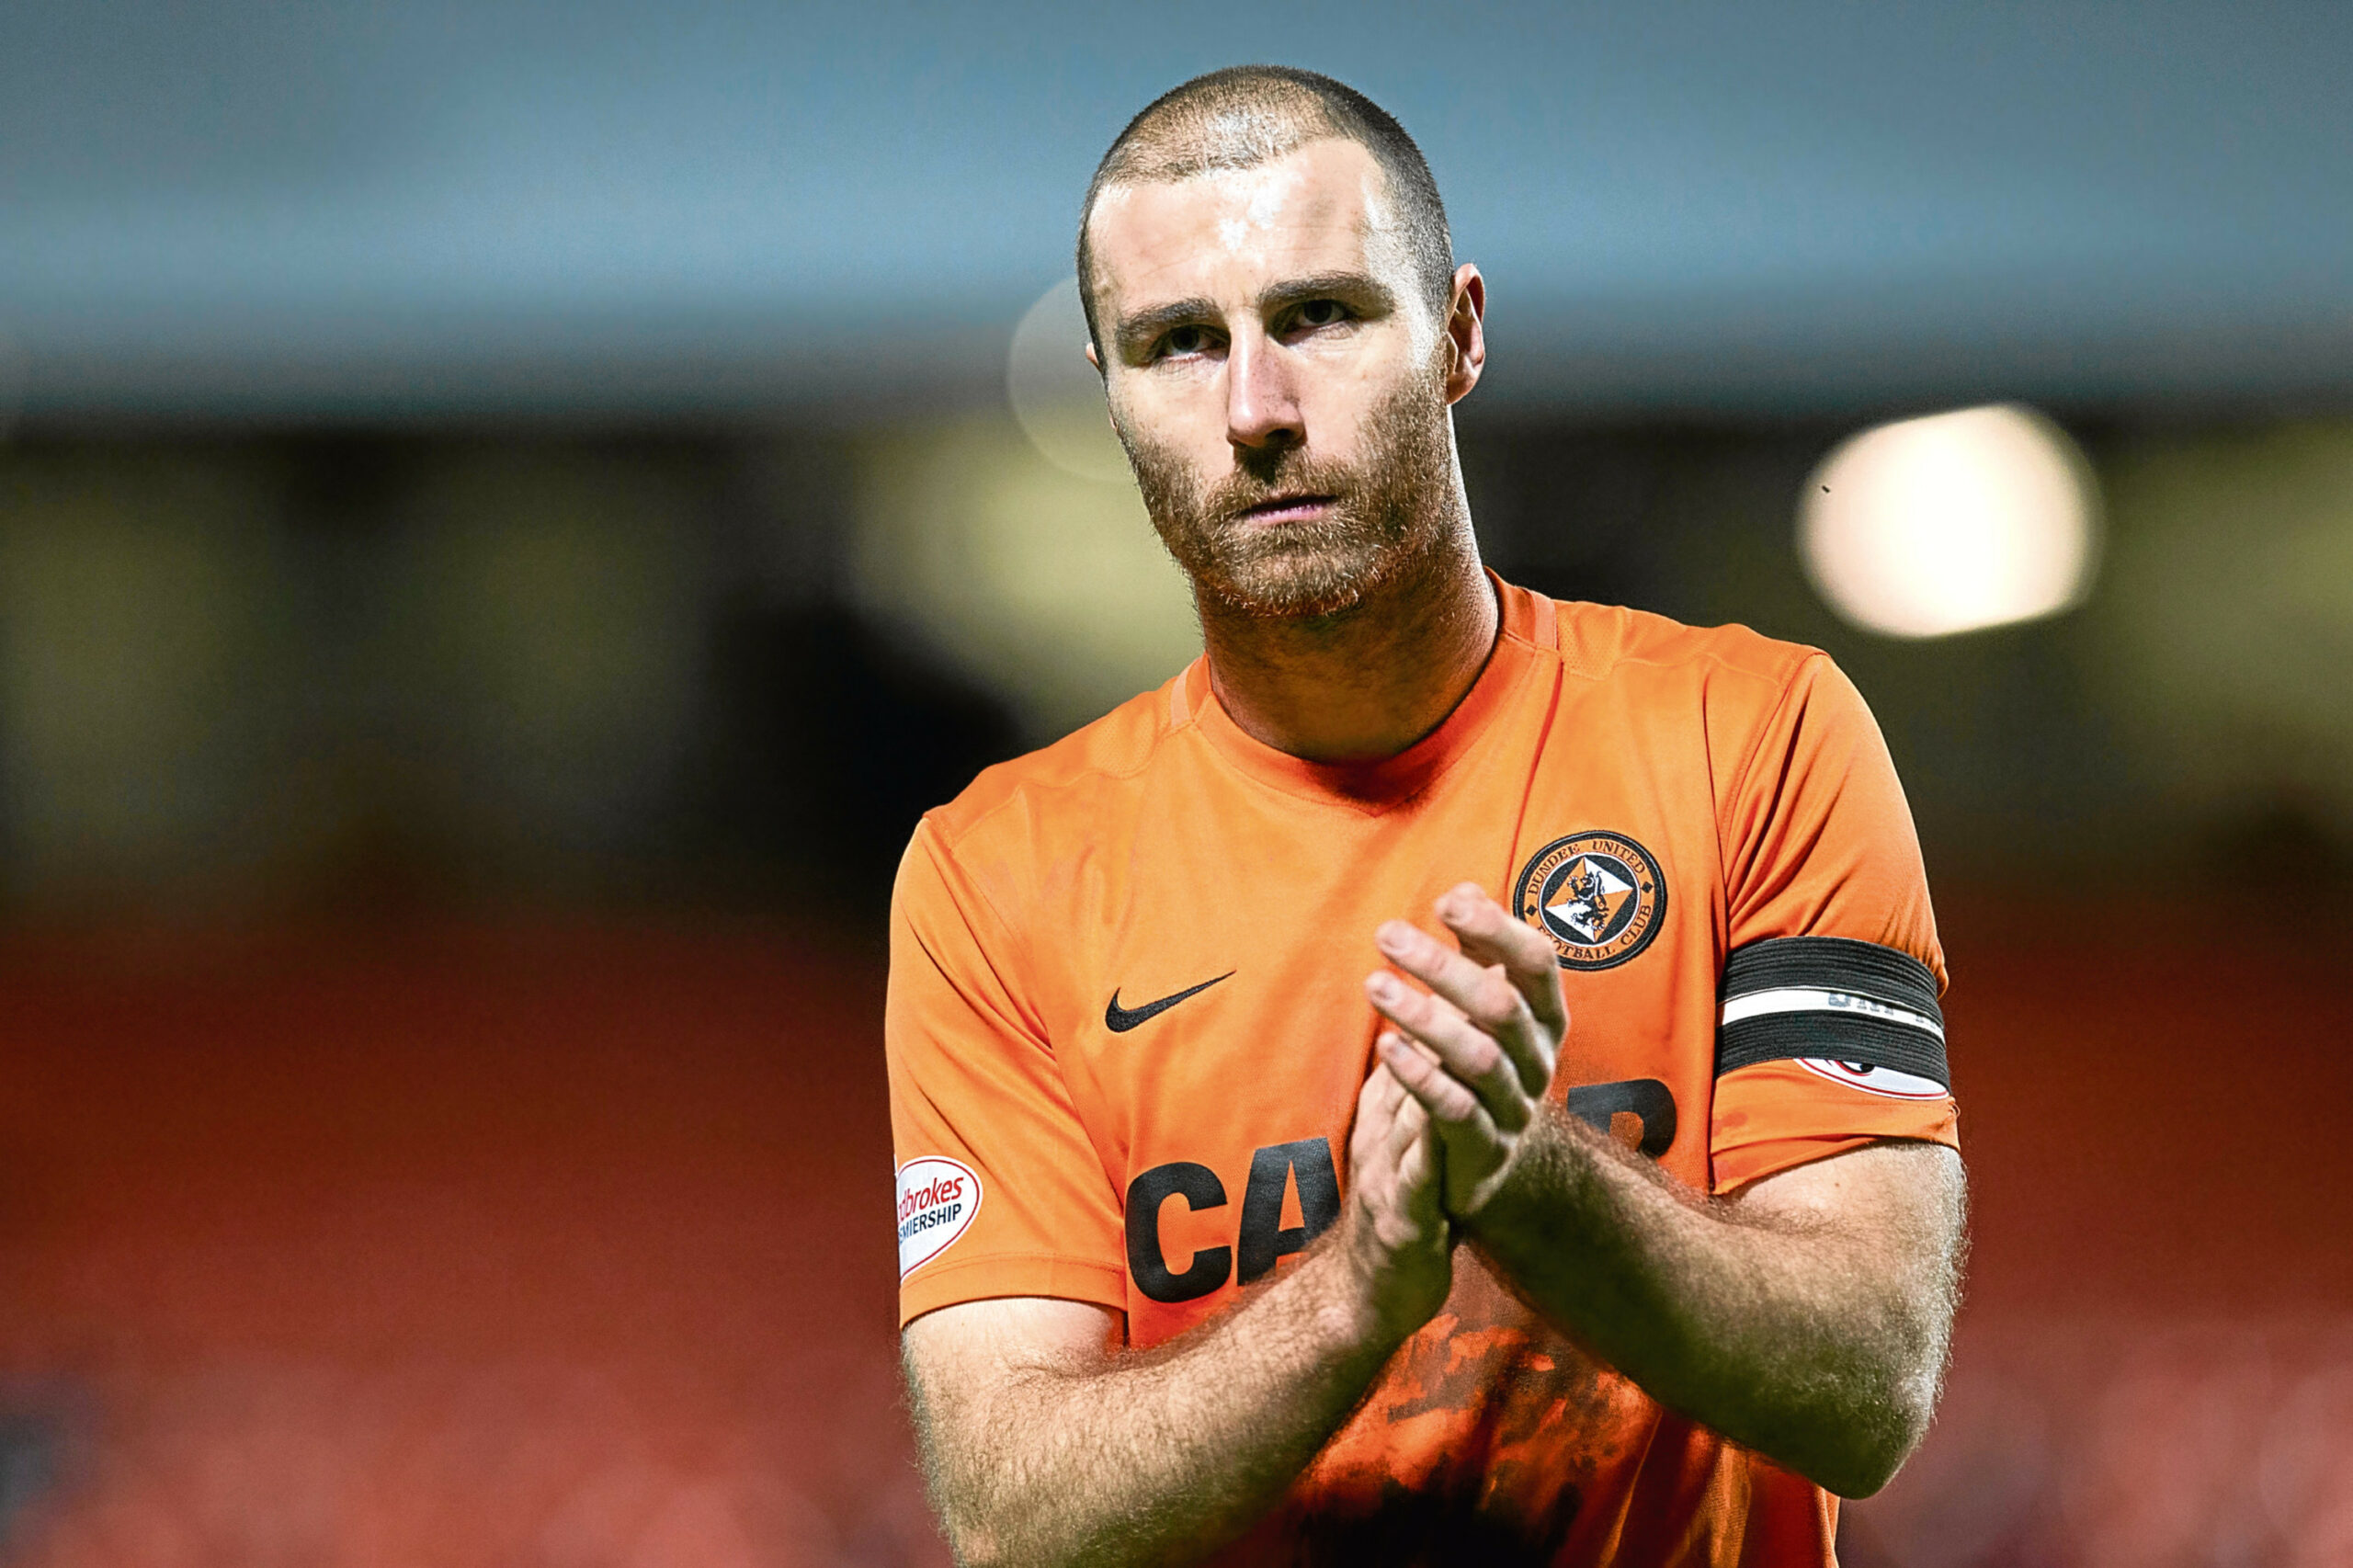 Dundee United's Sean Dillon applauds the home support at the full time whistle of January's clash with Kilmarnock